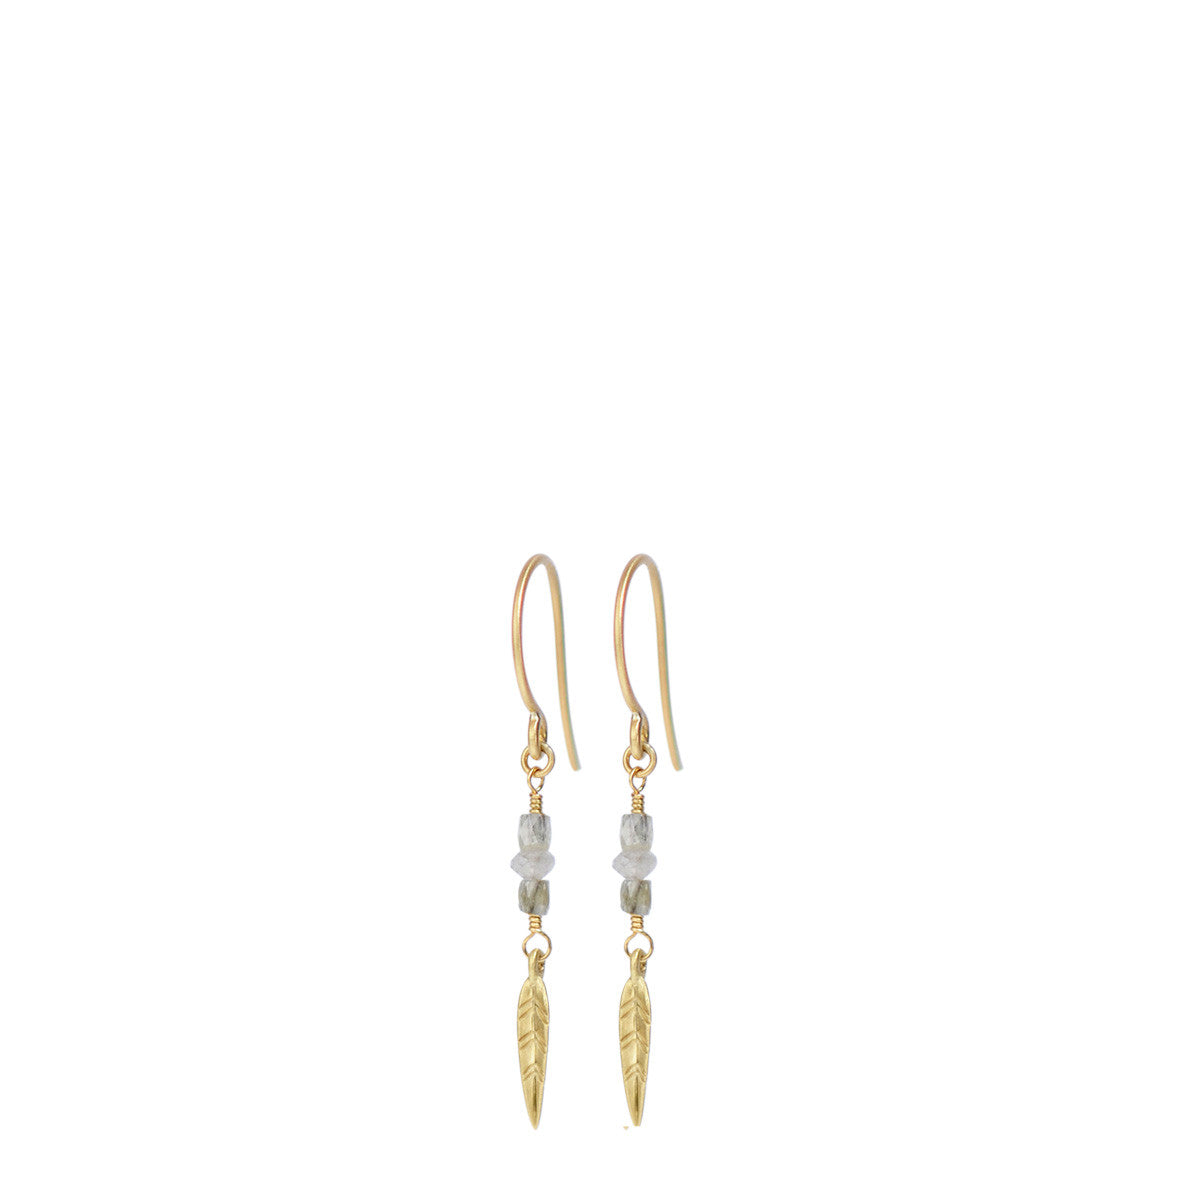 Buy YouBella Fashion Jewellery Fancy Traditional Stud Earrings Online At  Best Price @ Tata CLiQ